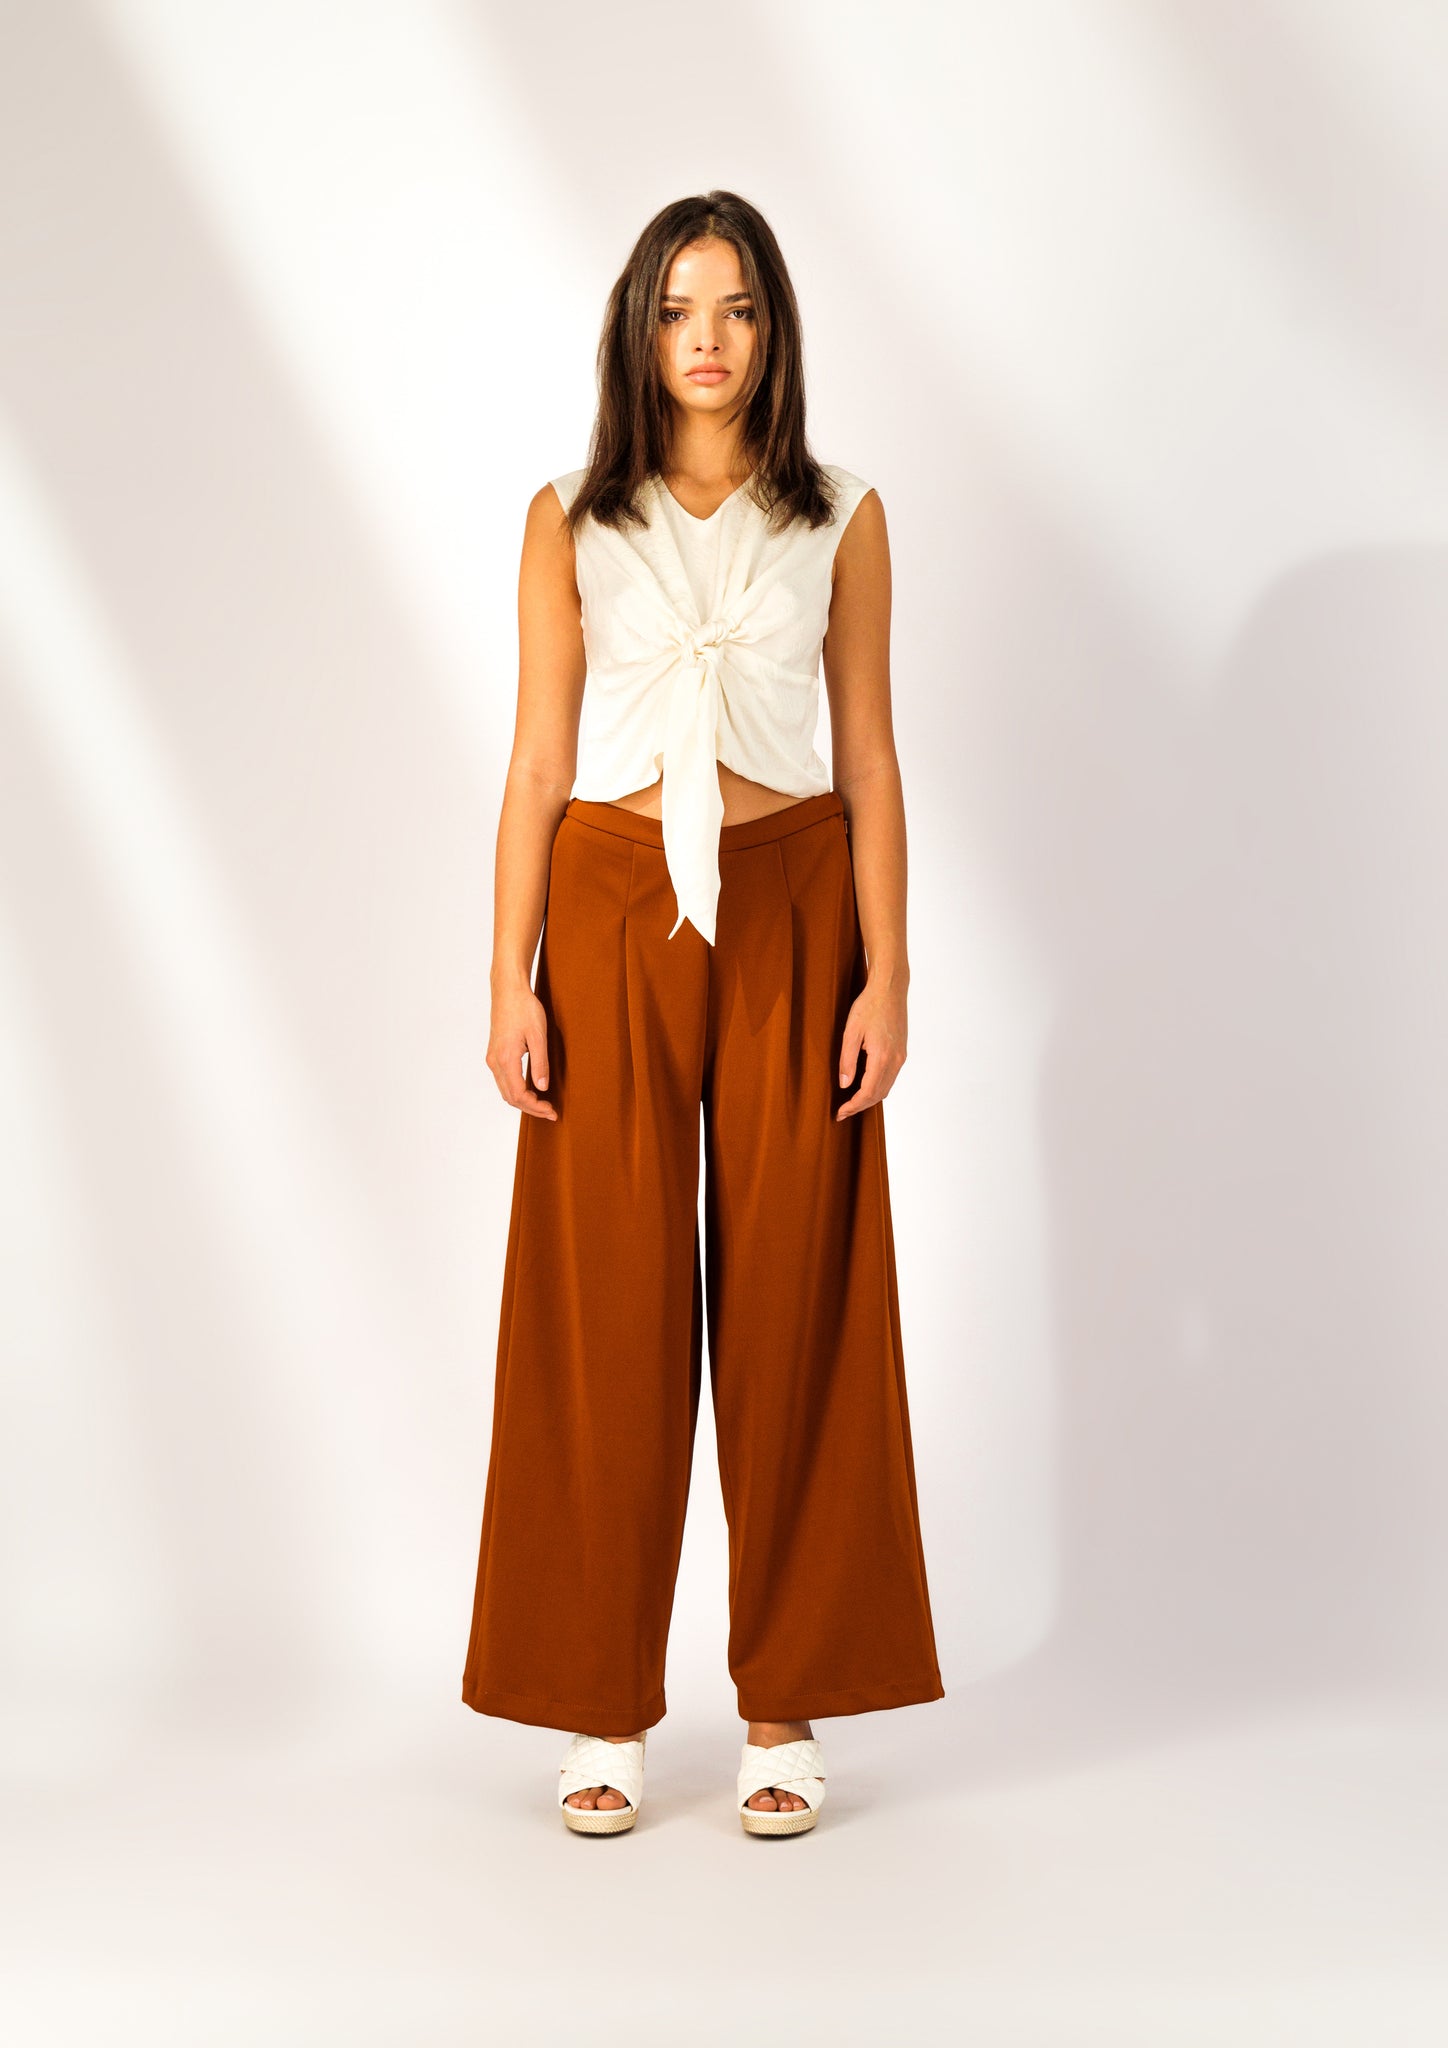 South Beach tie knot front top & pants beach set in stone | ASOS